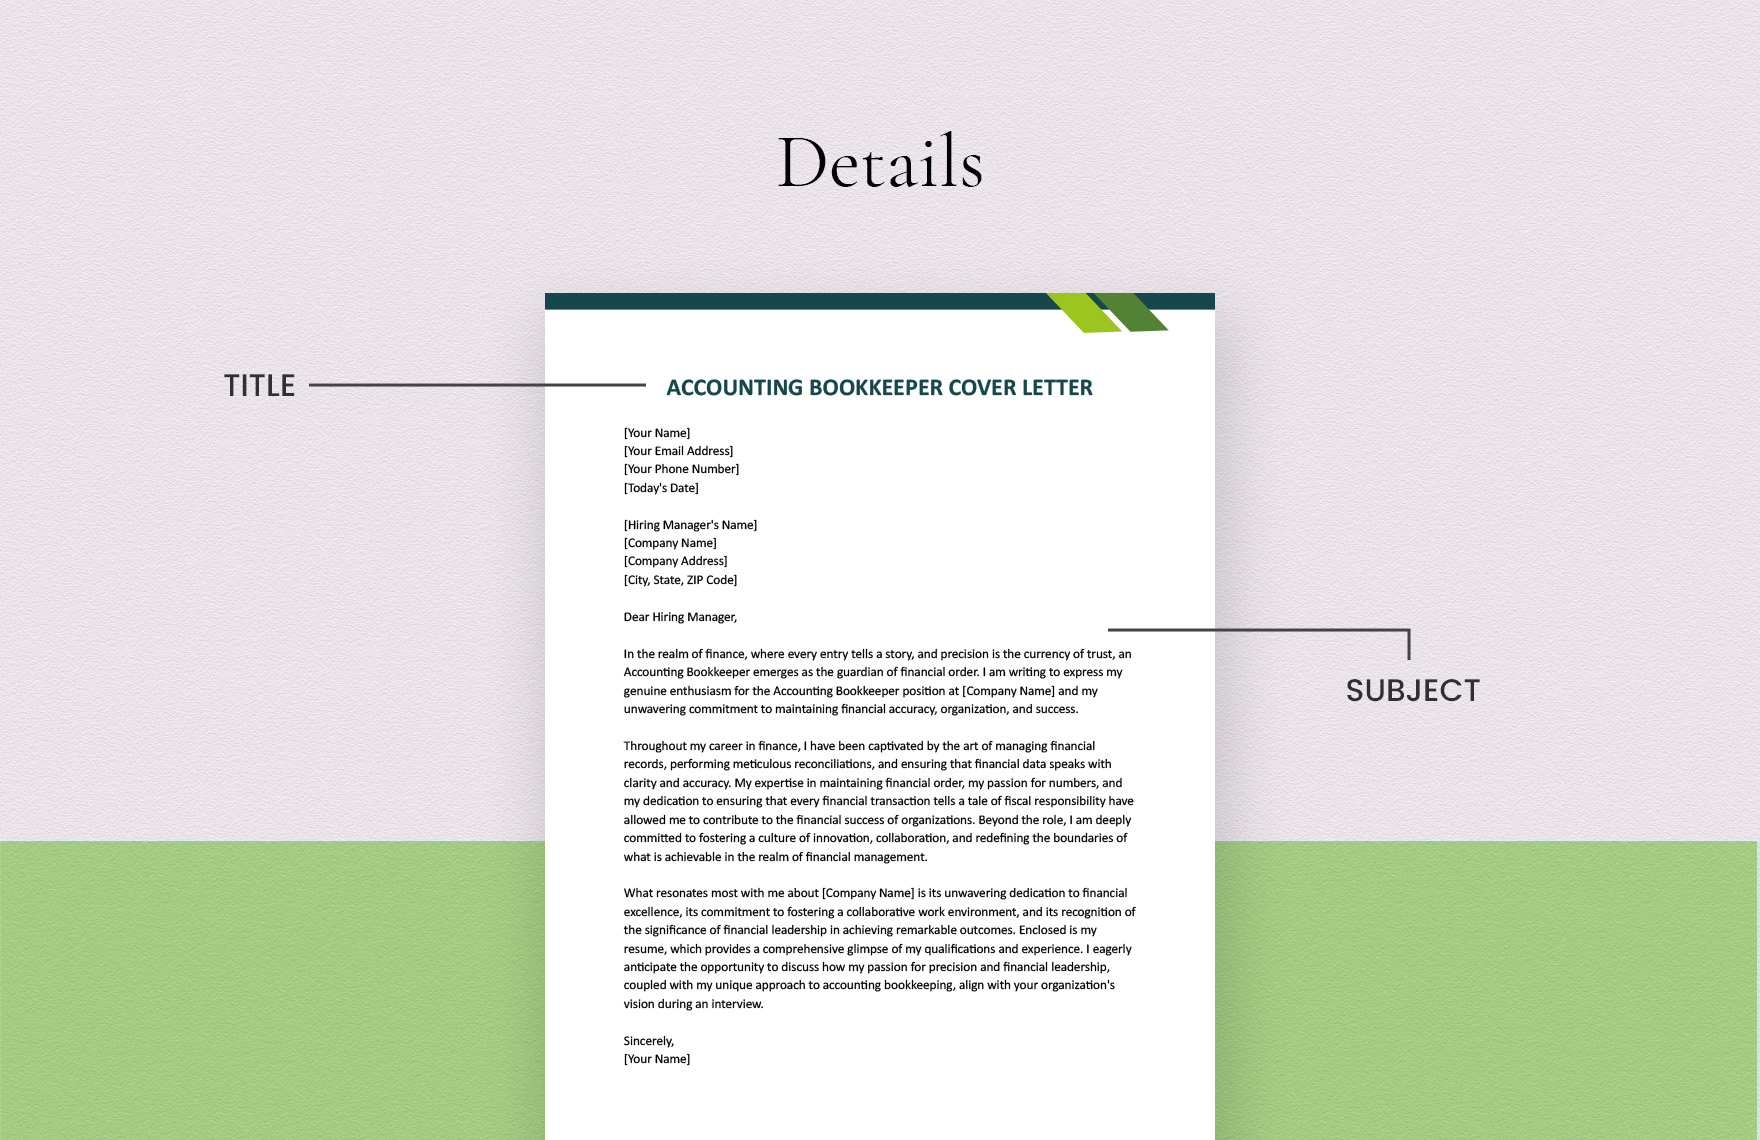 Accounting Bookkeeper Cover Letter